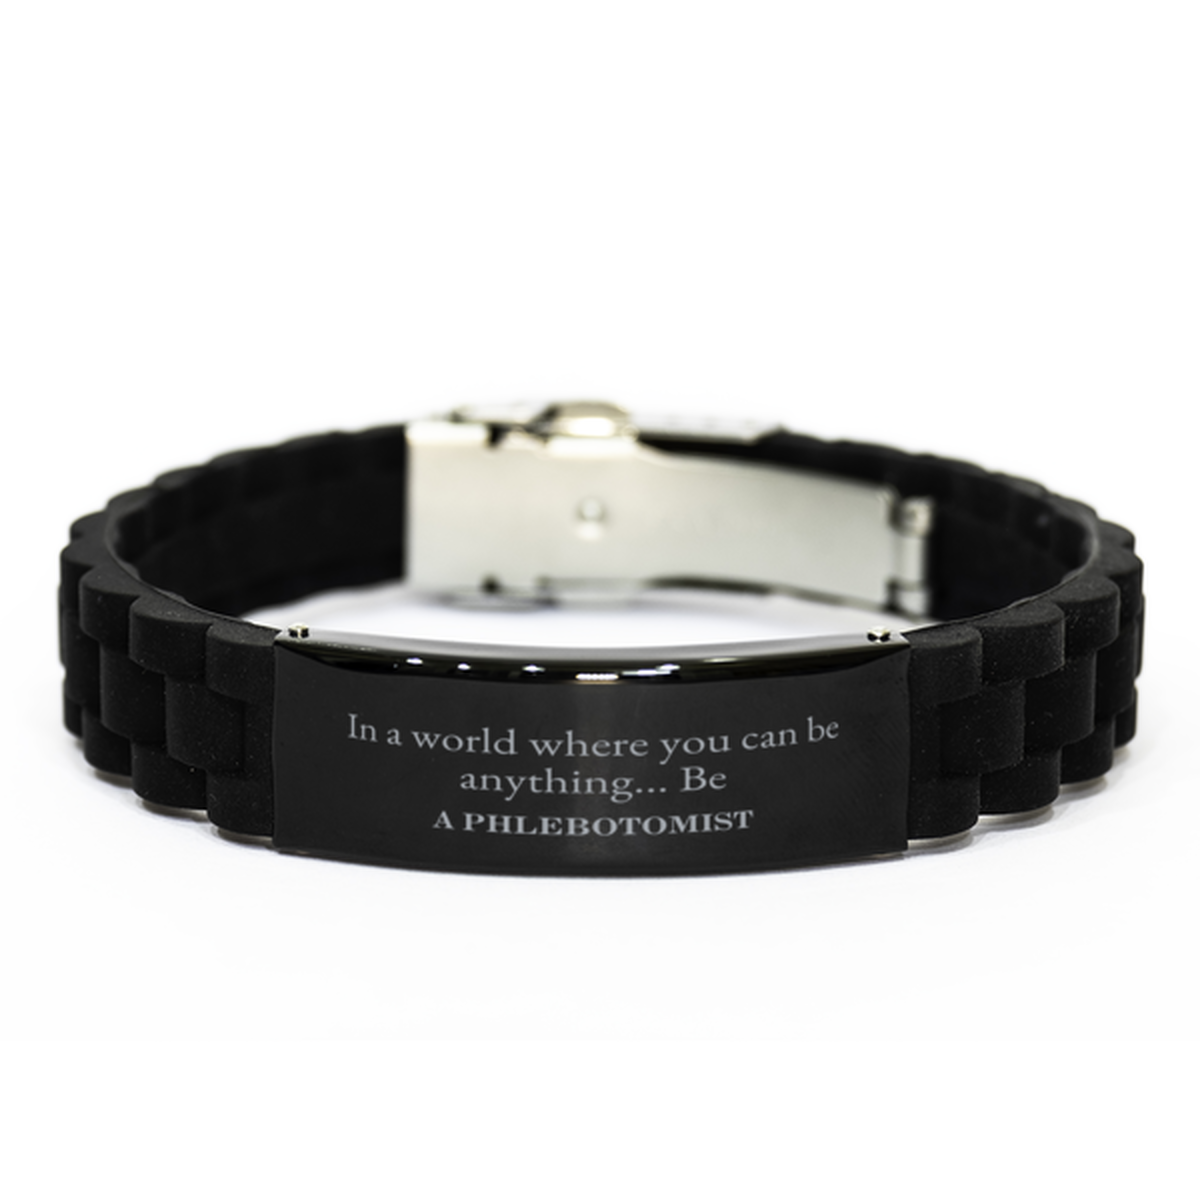 Gifts for Phlebotomist, In a world where you can be anything, Appreciation Birthday Black Glidelock Clasp Bracelet for Men, Women, Friends, Coworkers